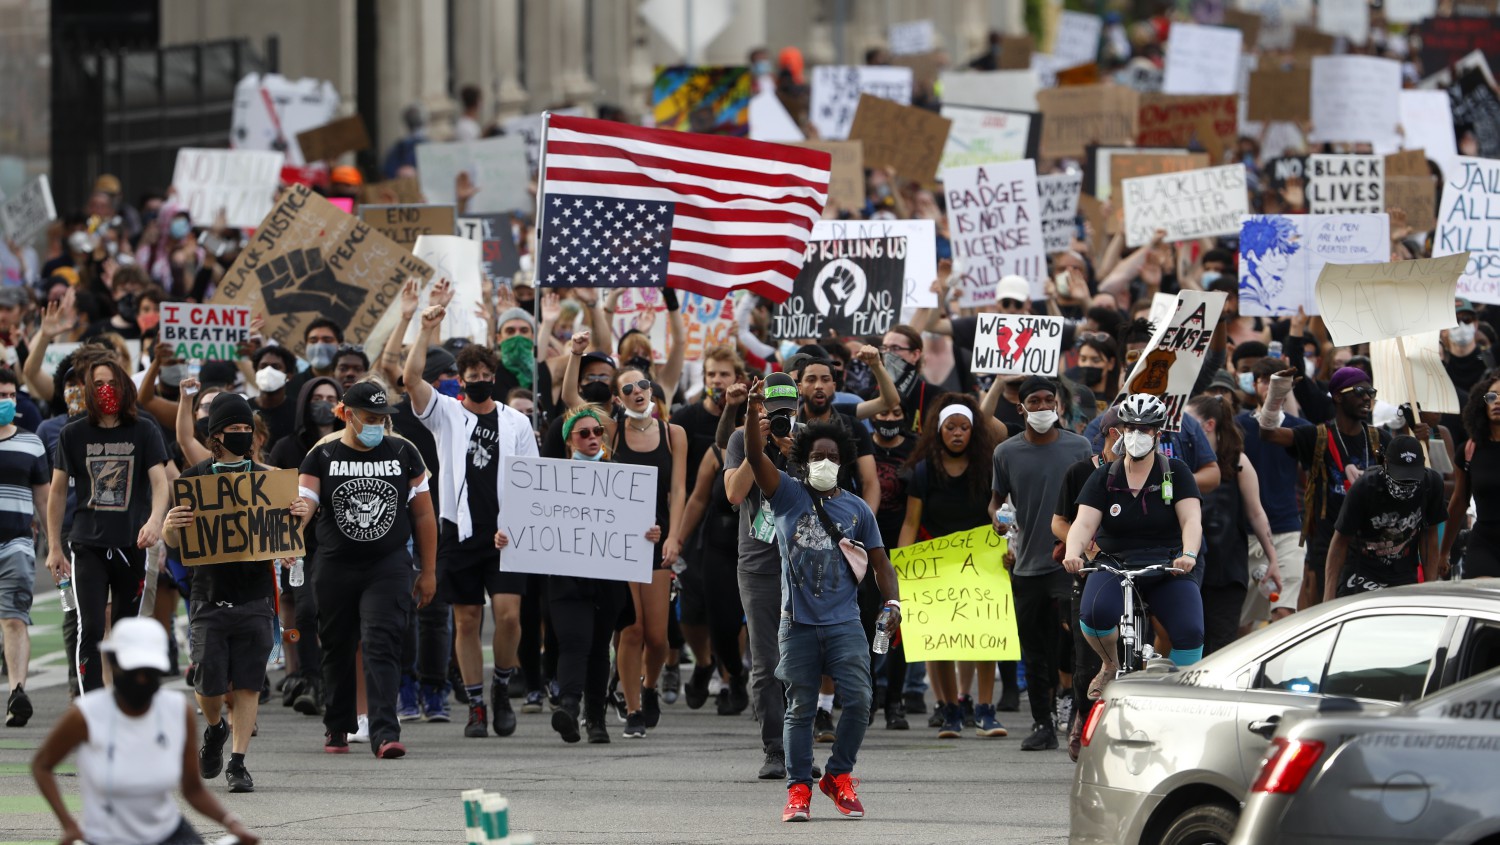 Protesters march after a rally in Detroit on Wednesday, June 3, 2020, over the death of George Floyd, a black man who died after being restrained by Minneapolis police officers on May 25 (AP Photo/Paul Sancya)